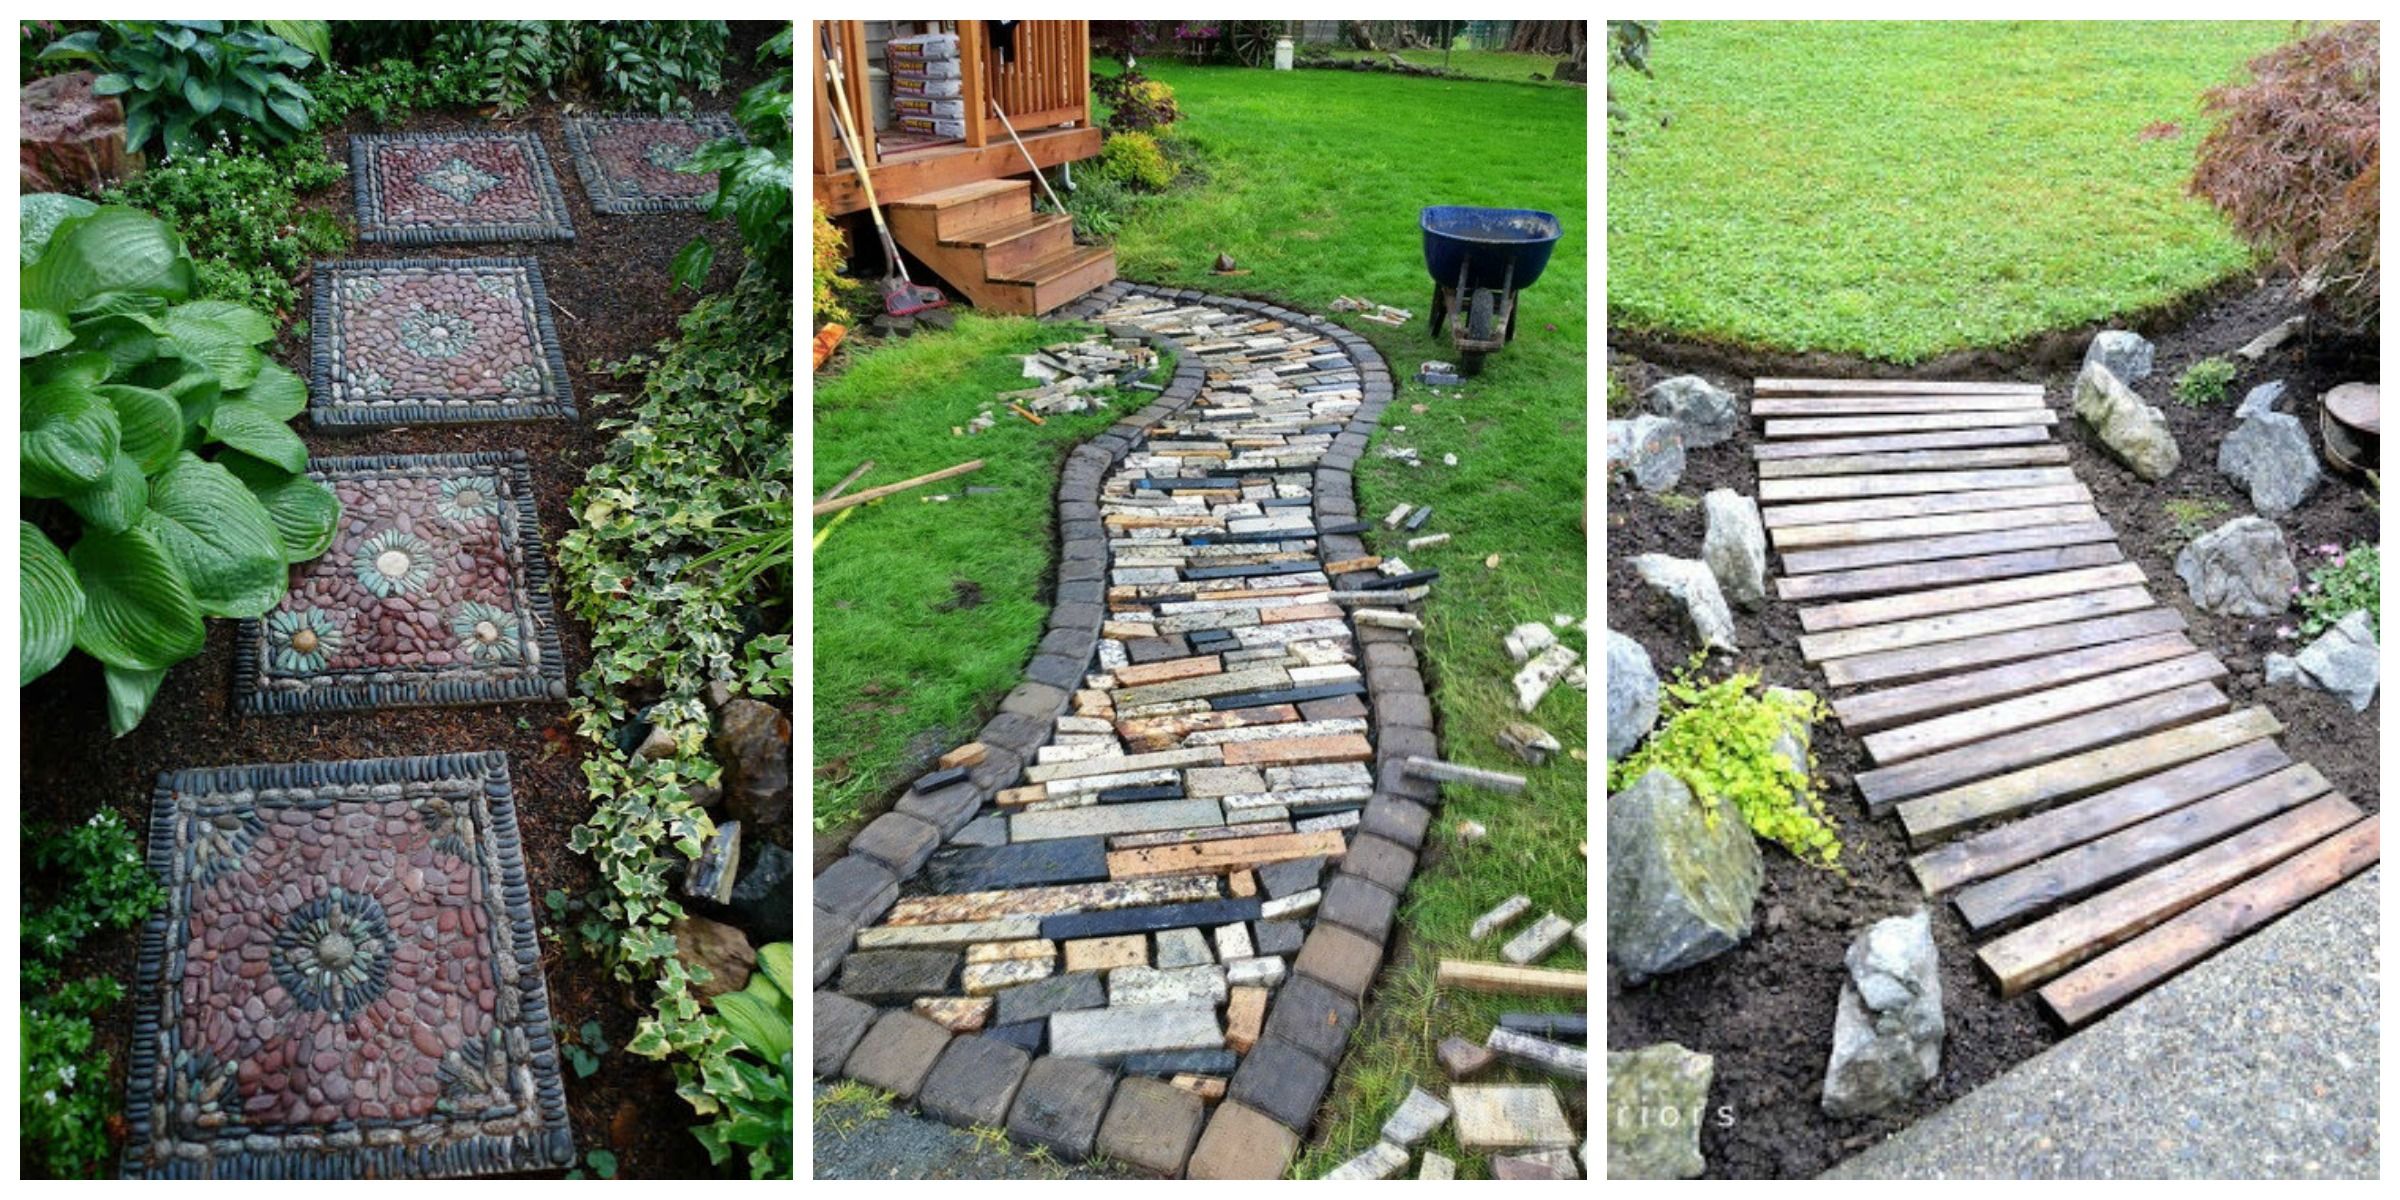 10 Diy Garden Path Ideas How To Make, Landscaping Paths And Walkways